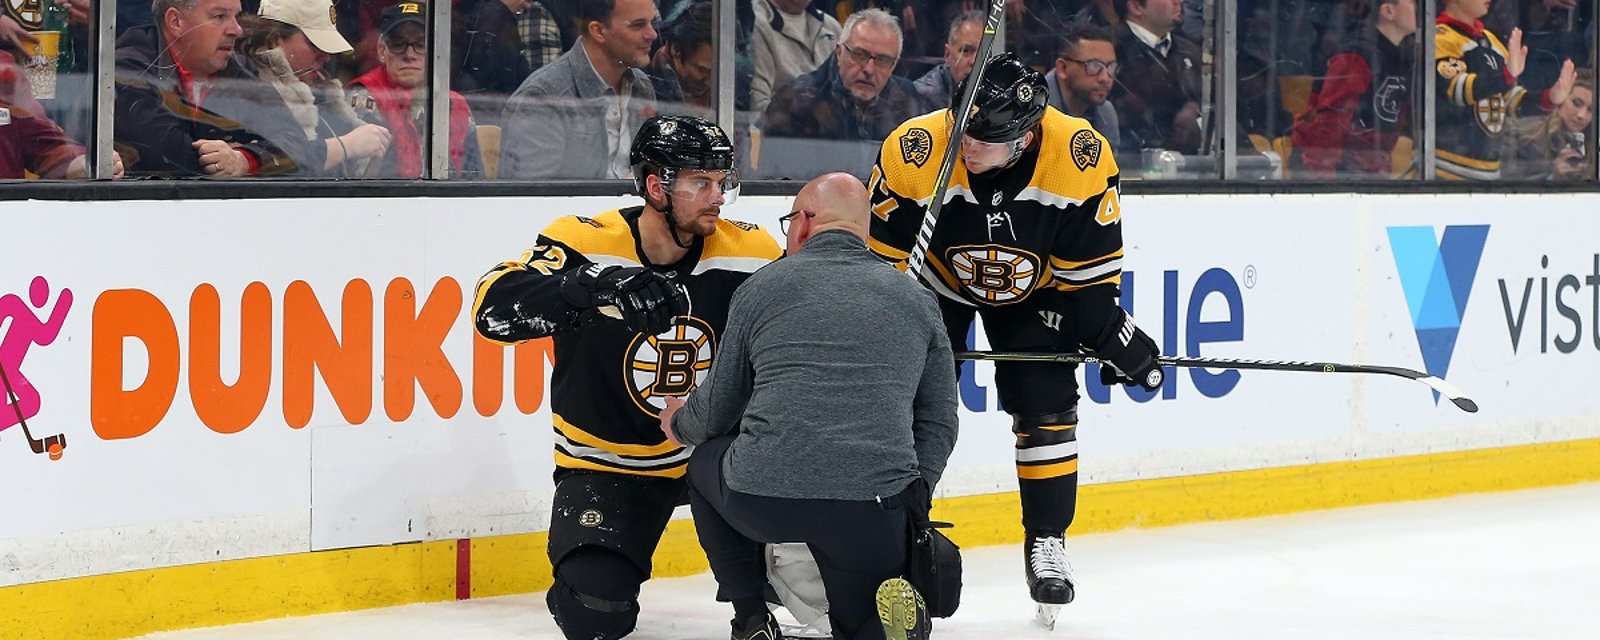 Bruin has surgery, will miss the first round of the playoffs.